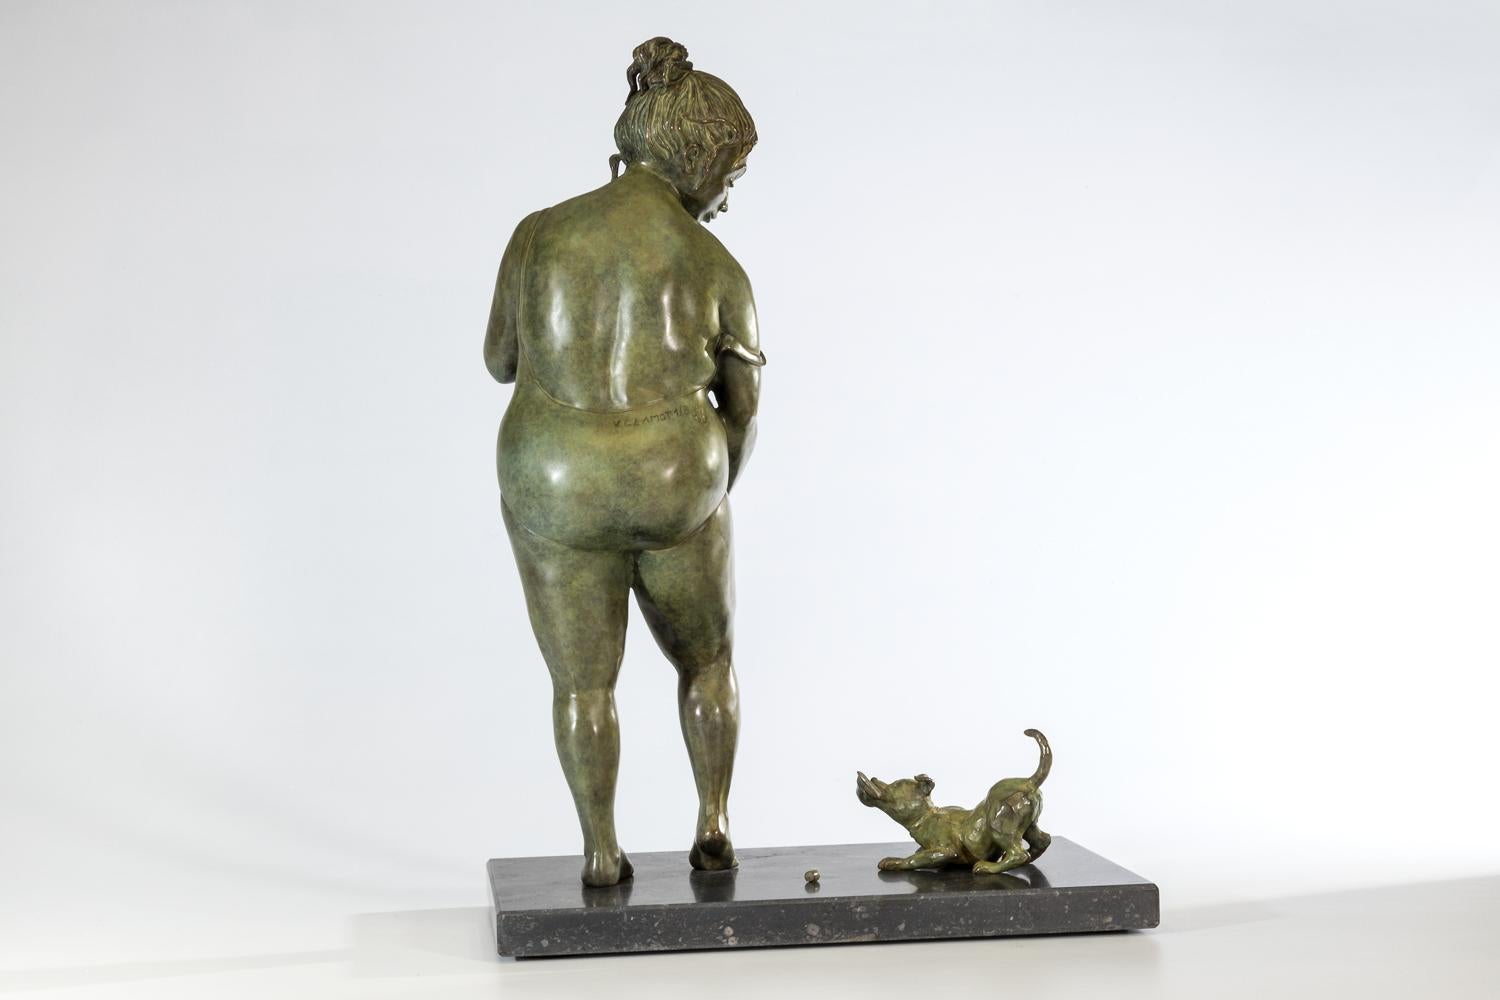 Trop Tard Bronze Sculpture Too Late Lady Dog Bathing Swim Suit In Stock
Veronique Clamot (1964, Charleroi, Belgium) is a self-taught artist. Although she has been occupied with making three dimensional works of art ever since her childhood, she is